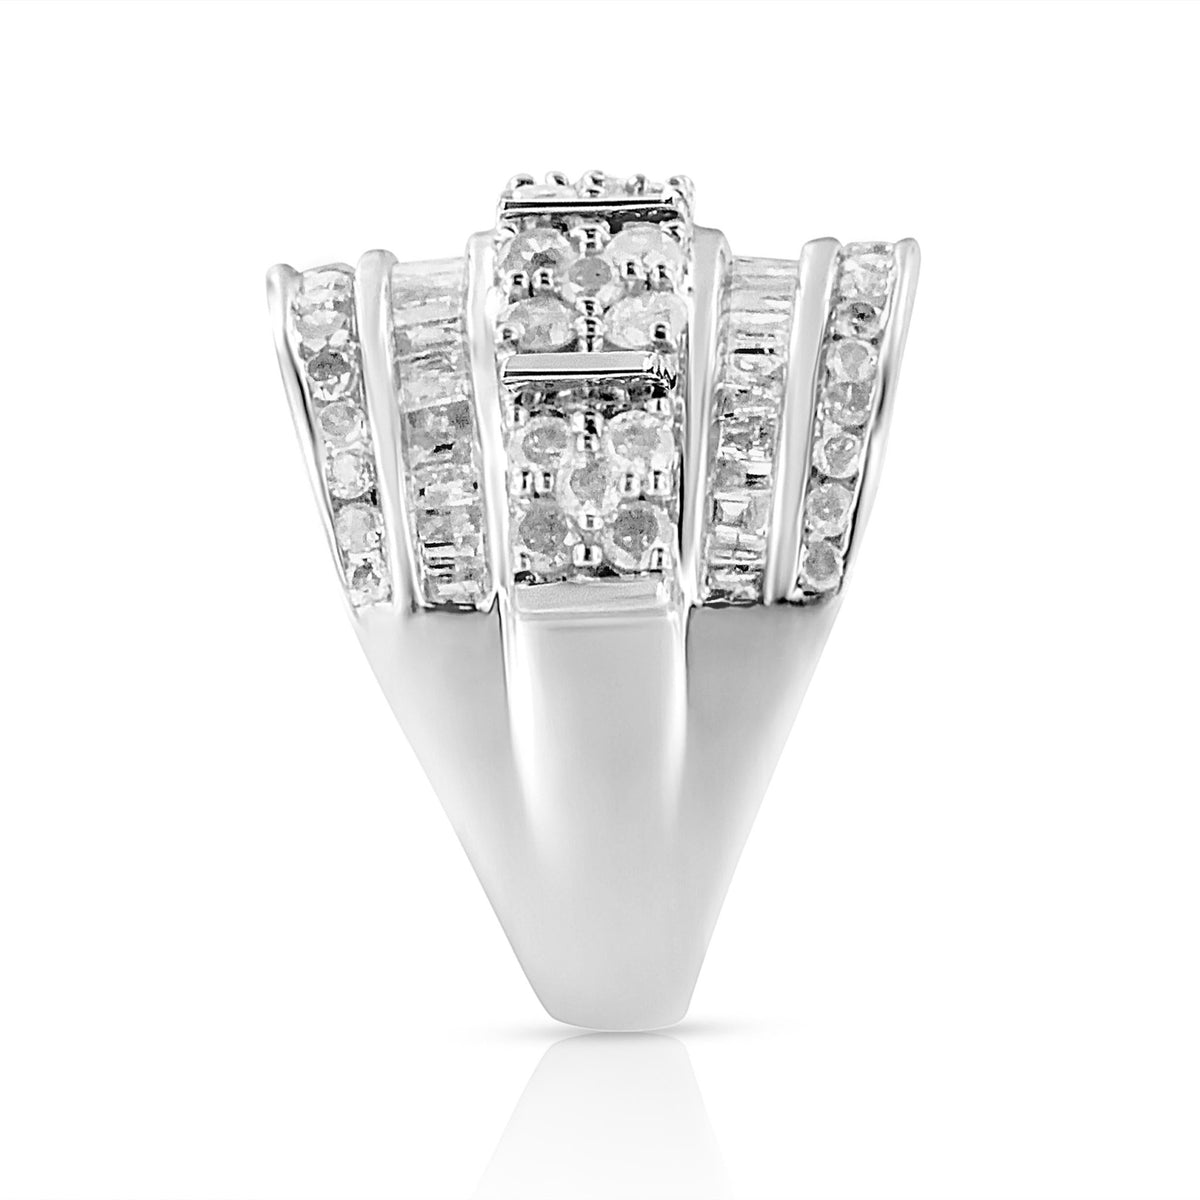 .925 Sterling Silver 2.0 Cttw Round &amp; Baguette Cut Diamond Multi-Row Channel Set Tapered Cocktail Fashion Ring (I-J Color, I3 Clarity) - Size 7 - LinkagejewelrydesignLinkagejewelrydesign